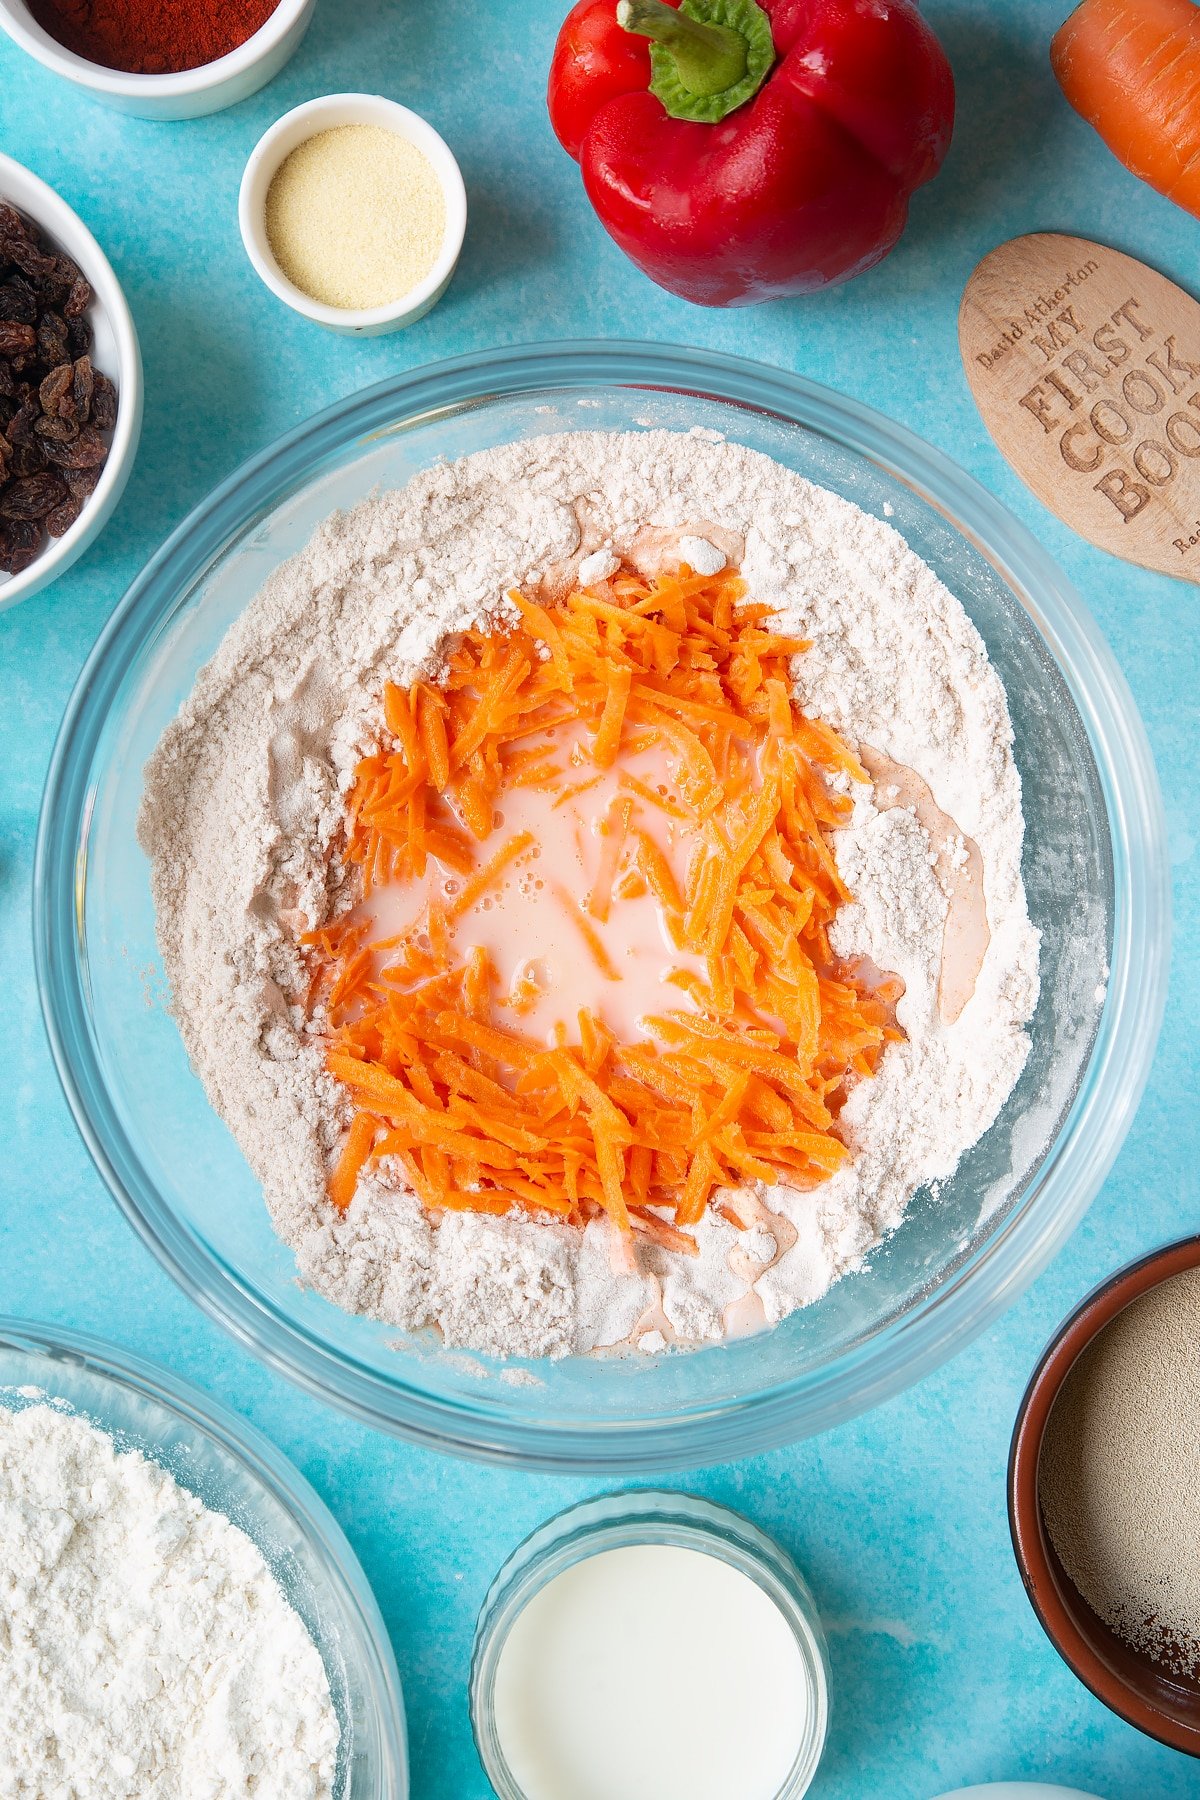 Flour, salt, paprika, yeast, grated carrot, milk and water in a mixing bowl. Ingredients to make bread snakes surround the bowl.